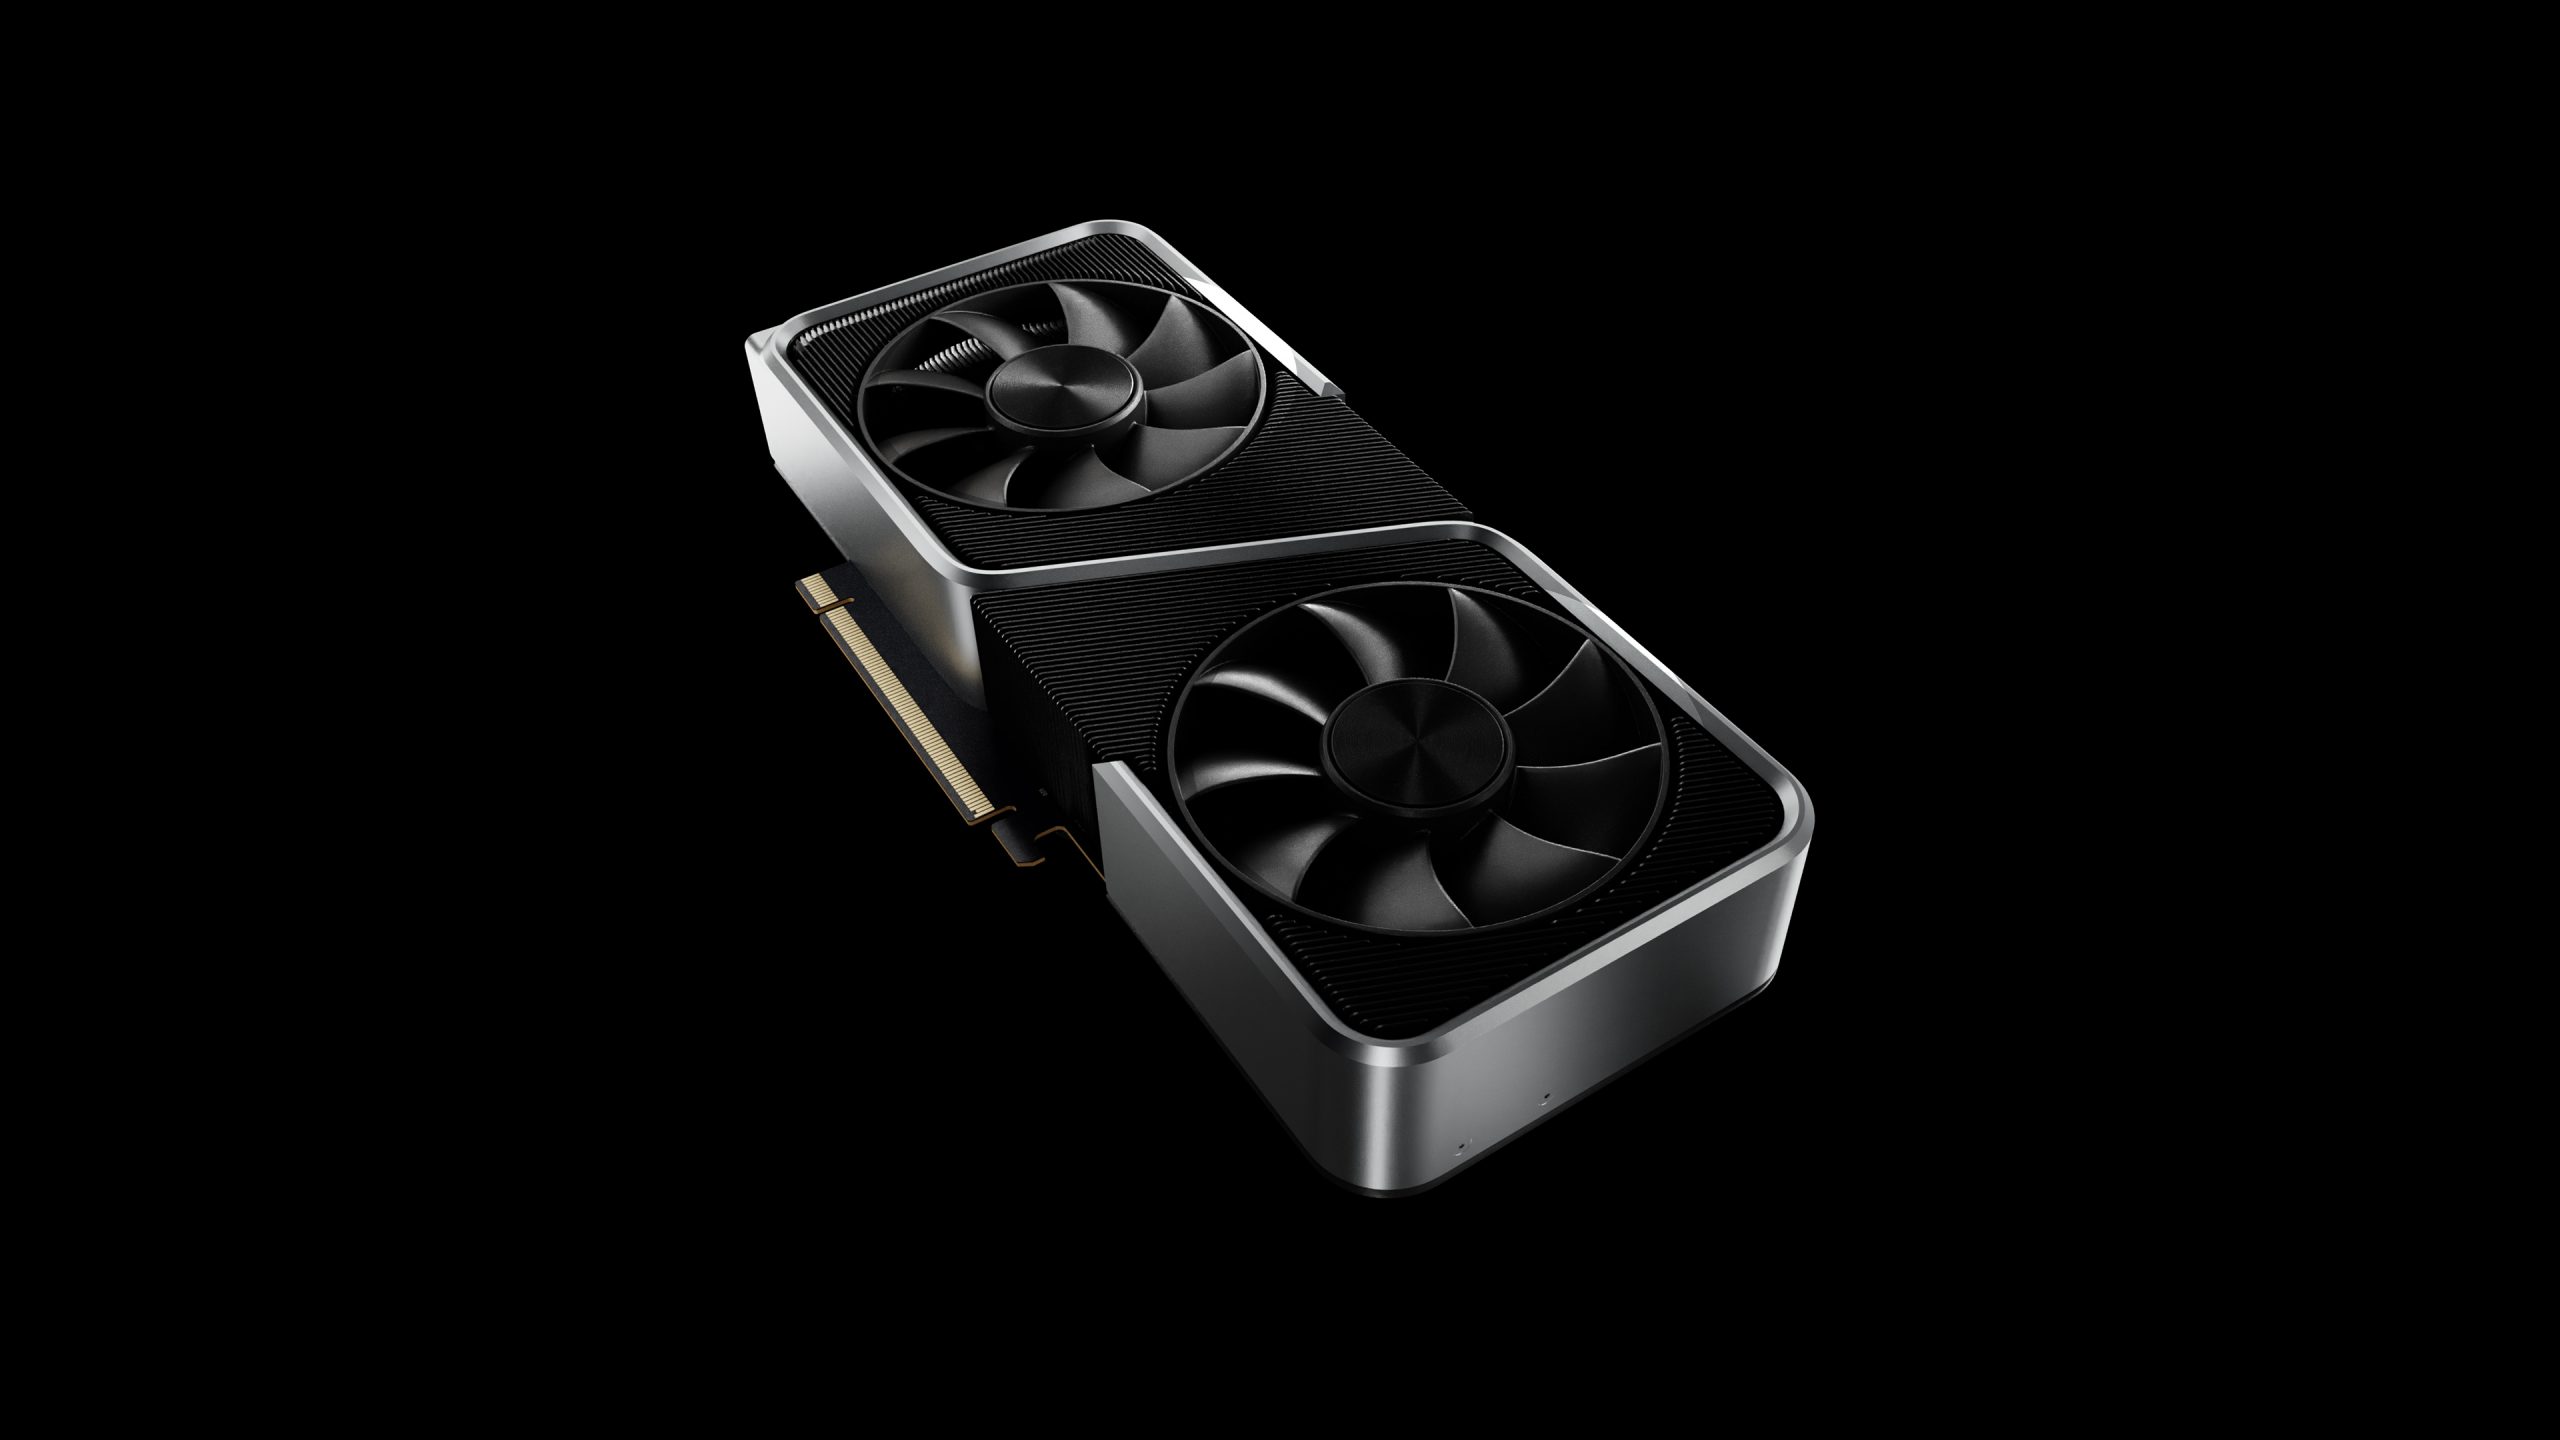 Nvidia RTX 3060 Ti graphics card could be getting a new version